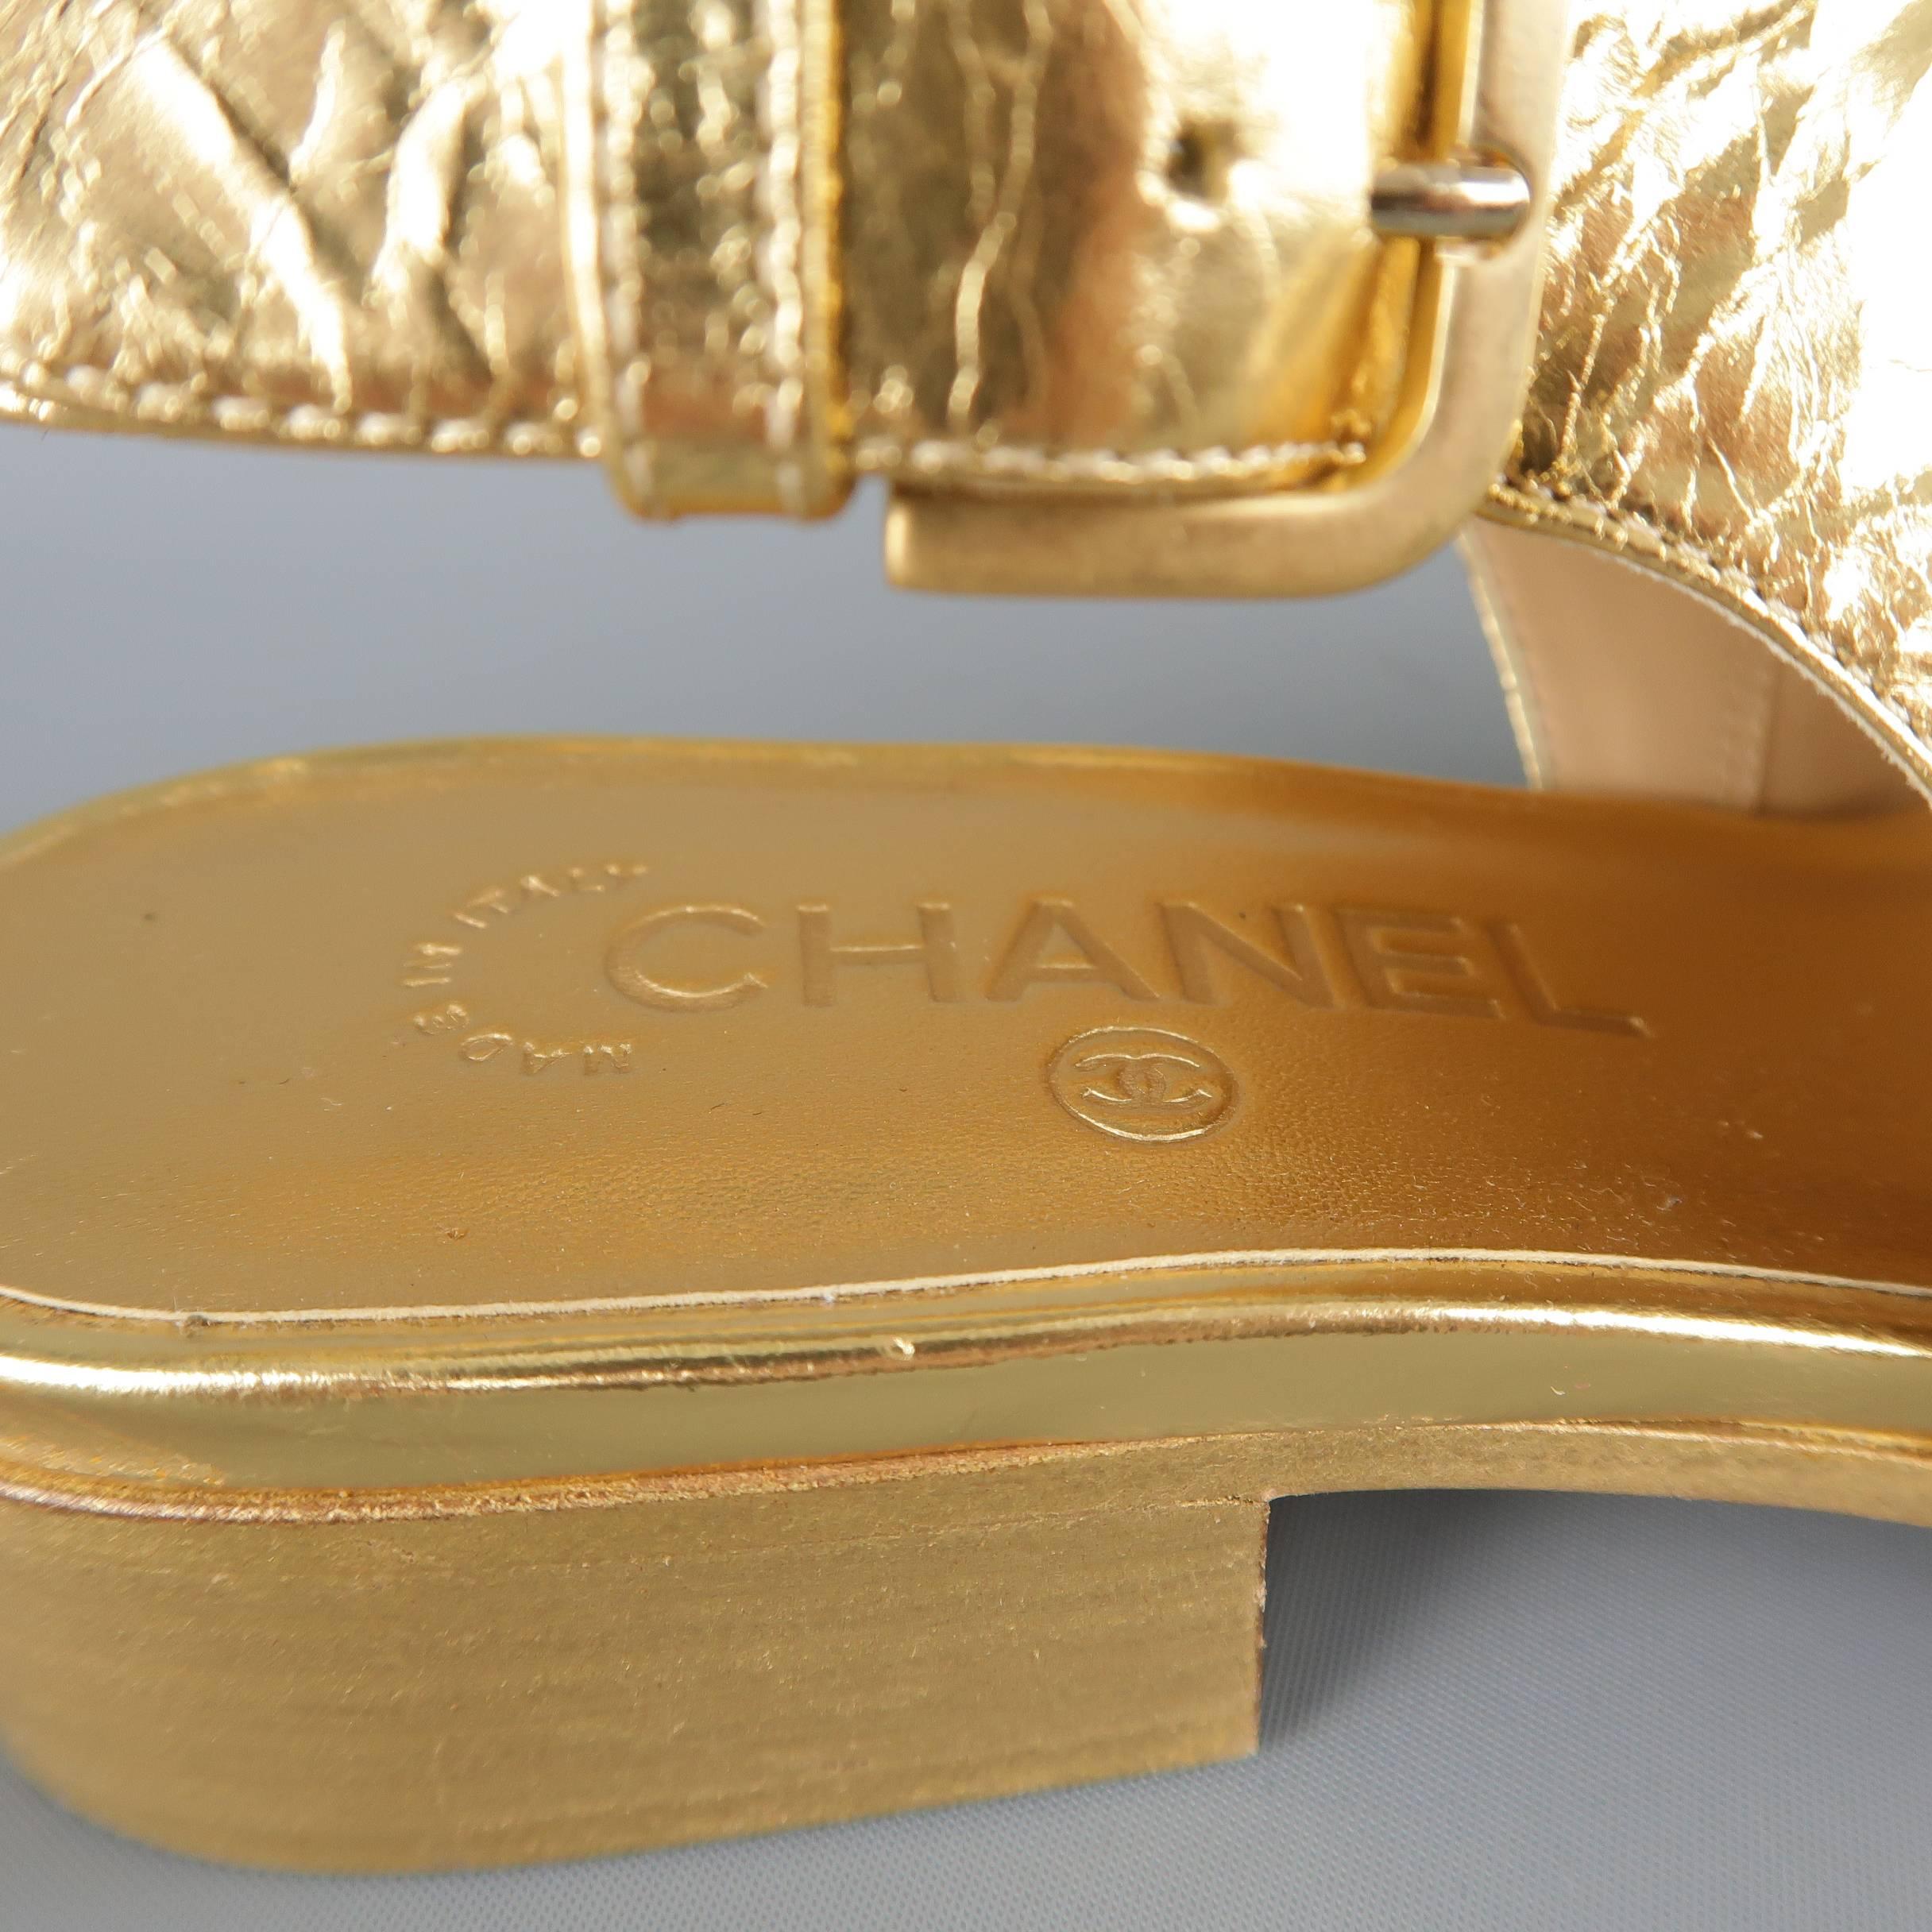 Chanel Size 7 Gold Metallic Leather Peep Toe Ankle Strap Oxford Sandals 2